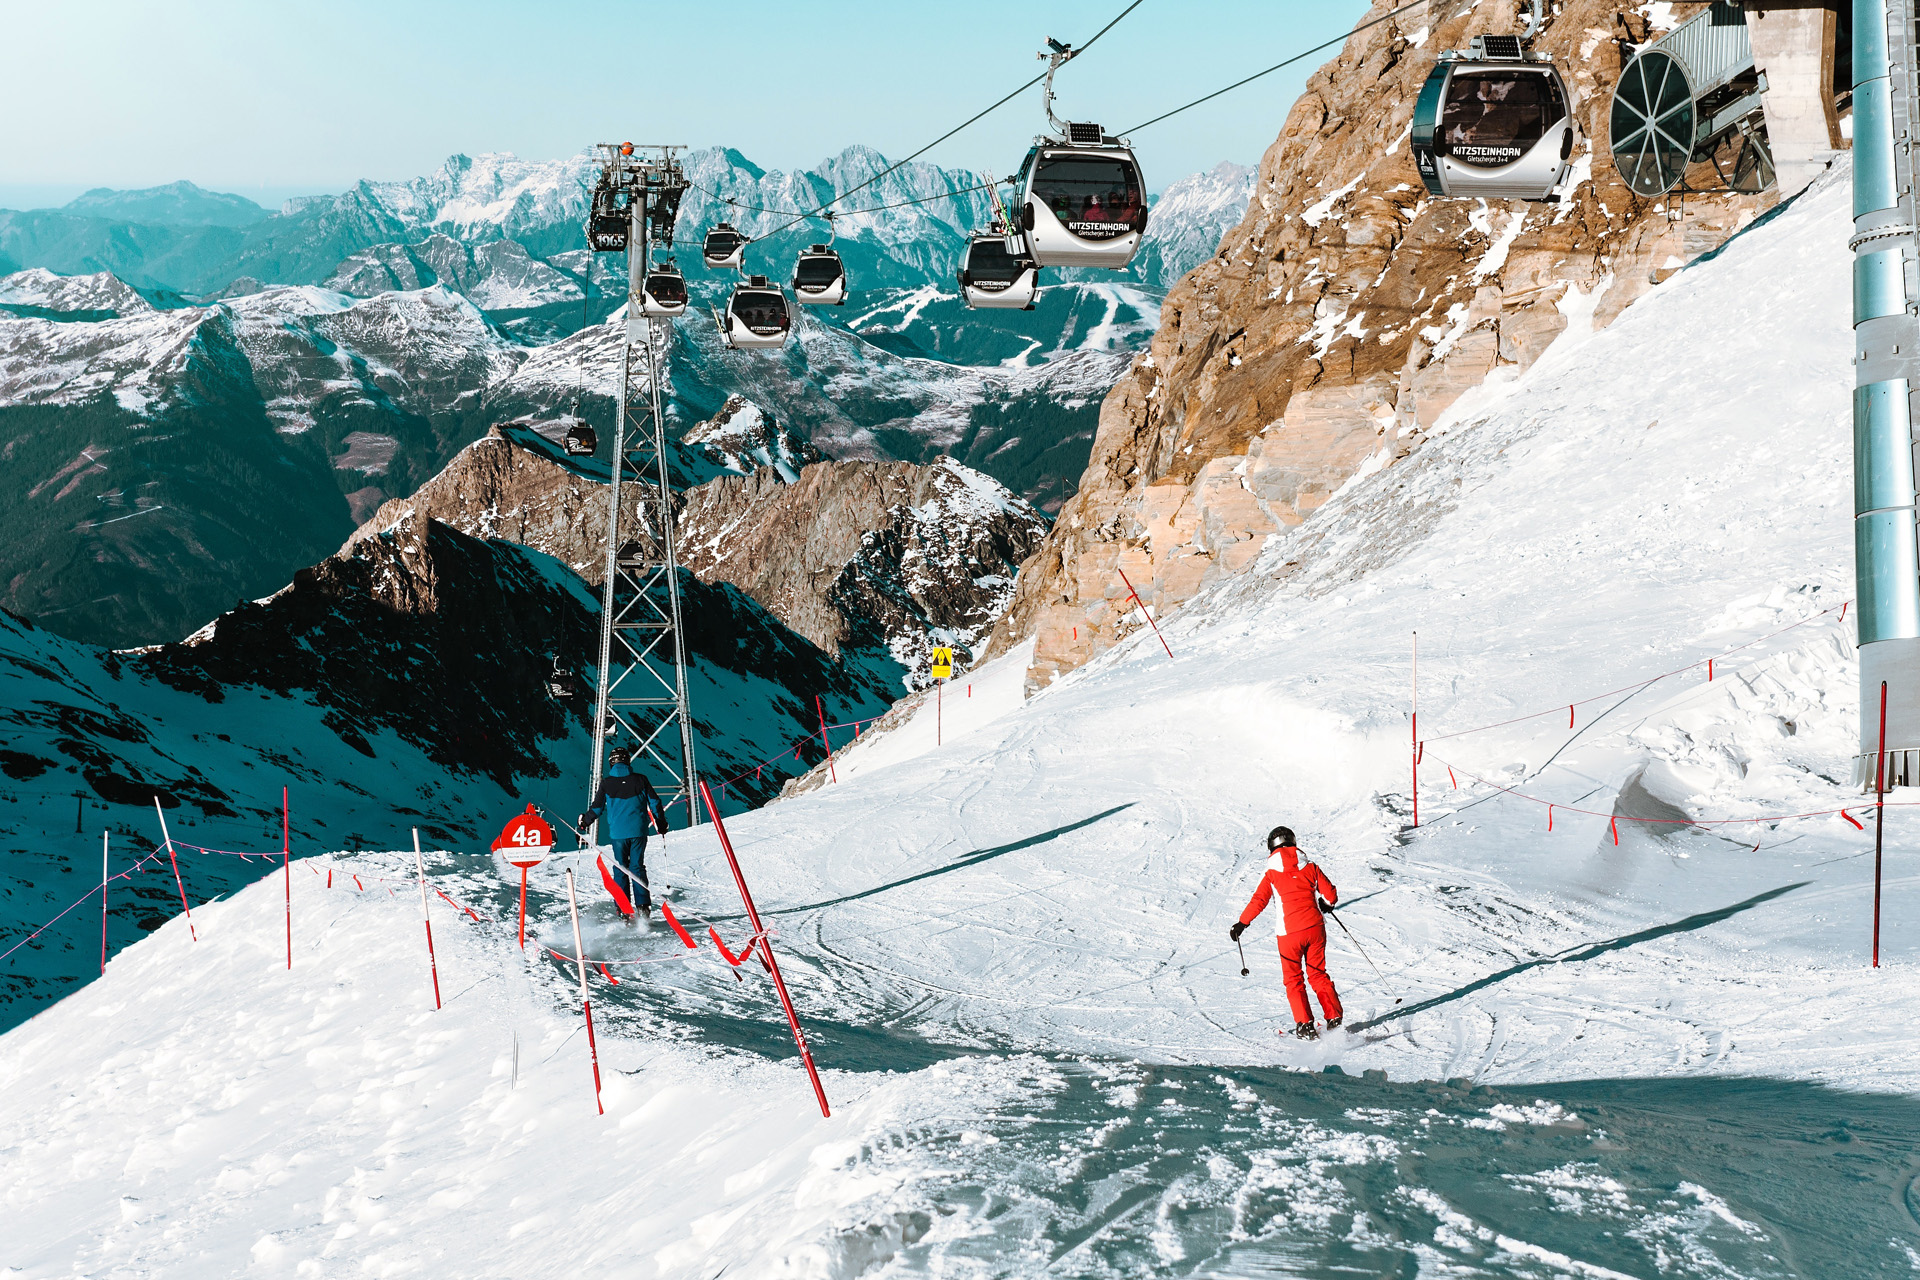 skiers and cablecars on a snowy mountain